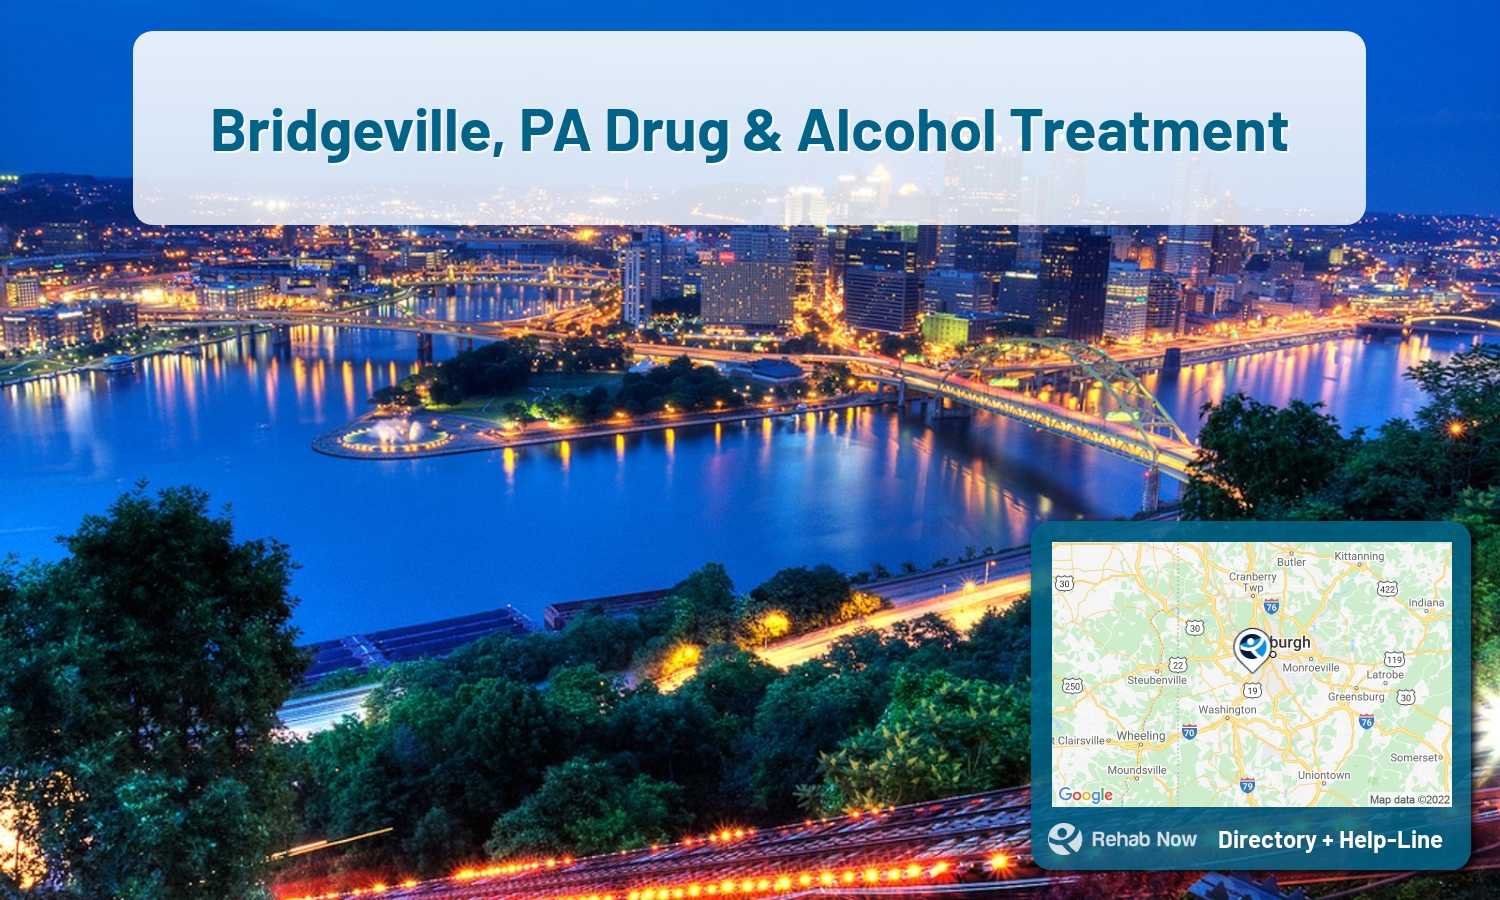 Bridgeville, PA Treatment Centers. Find drug rehab in Bridgeville, Pennsylvania, or detox and treatment programs. Get the right help now!